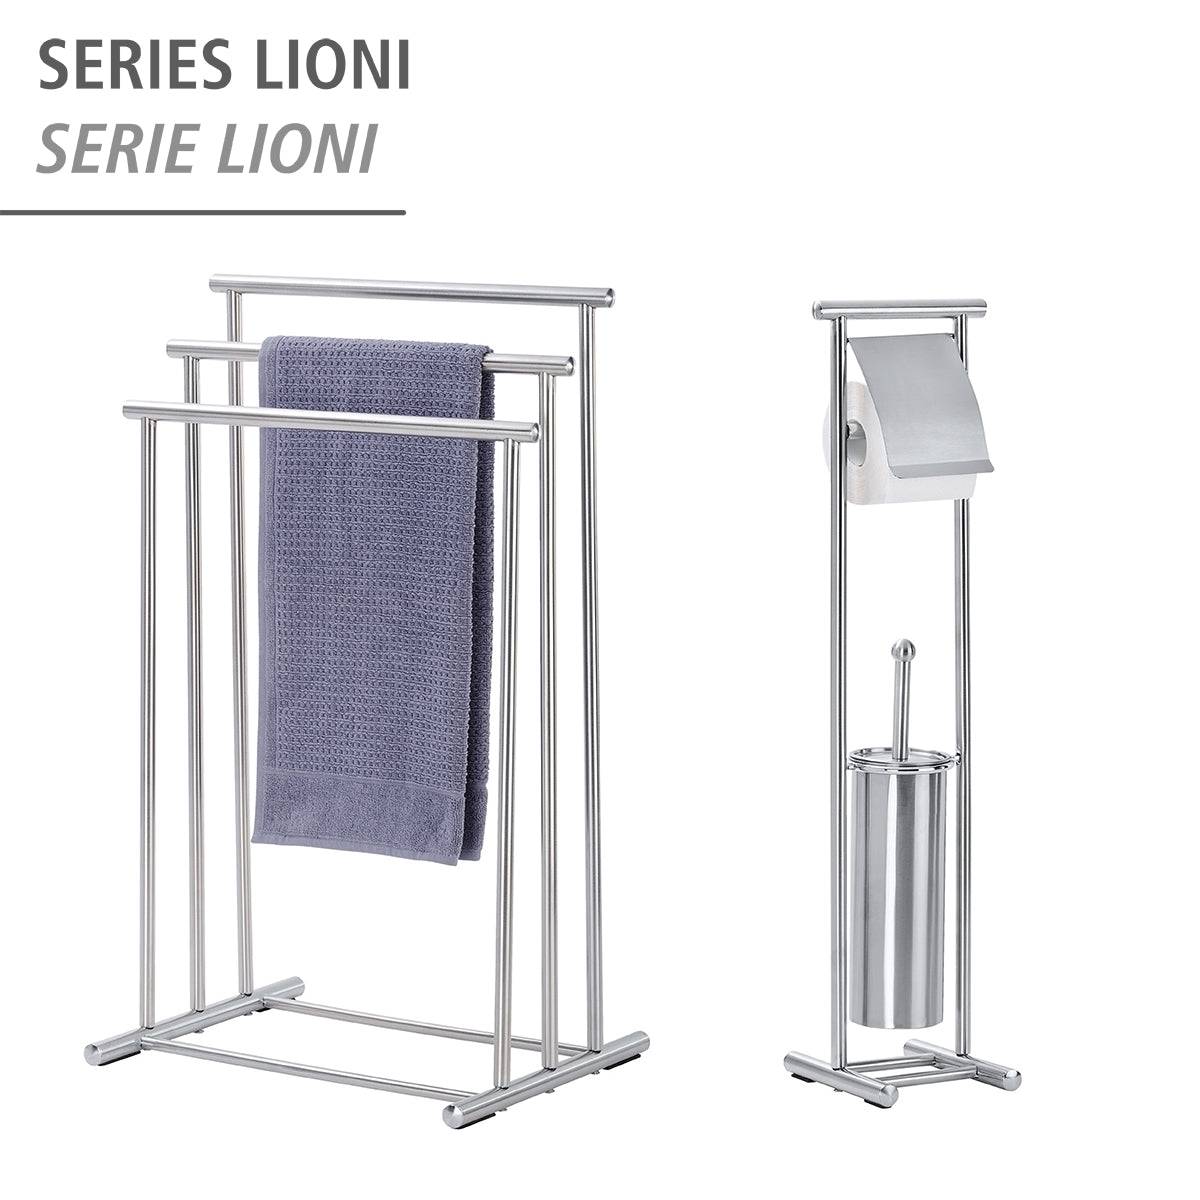 TOWEL AND CLOTHES STAND - 3-TIER STEEL - LIONI